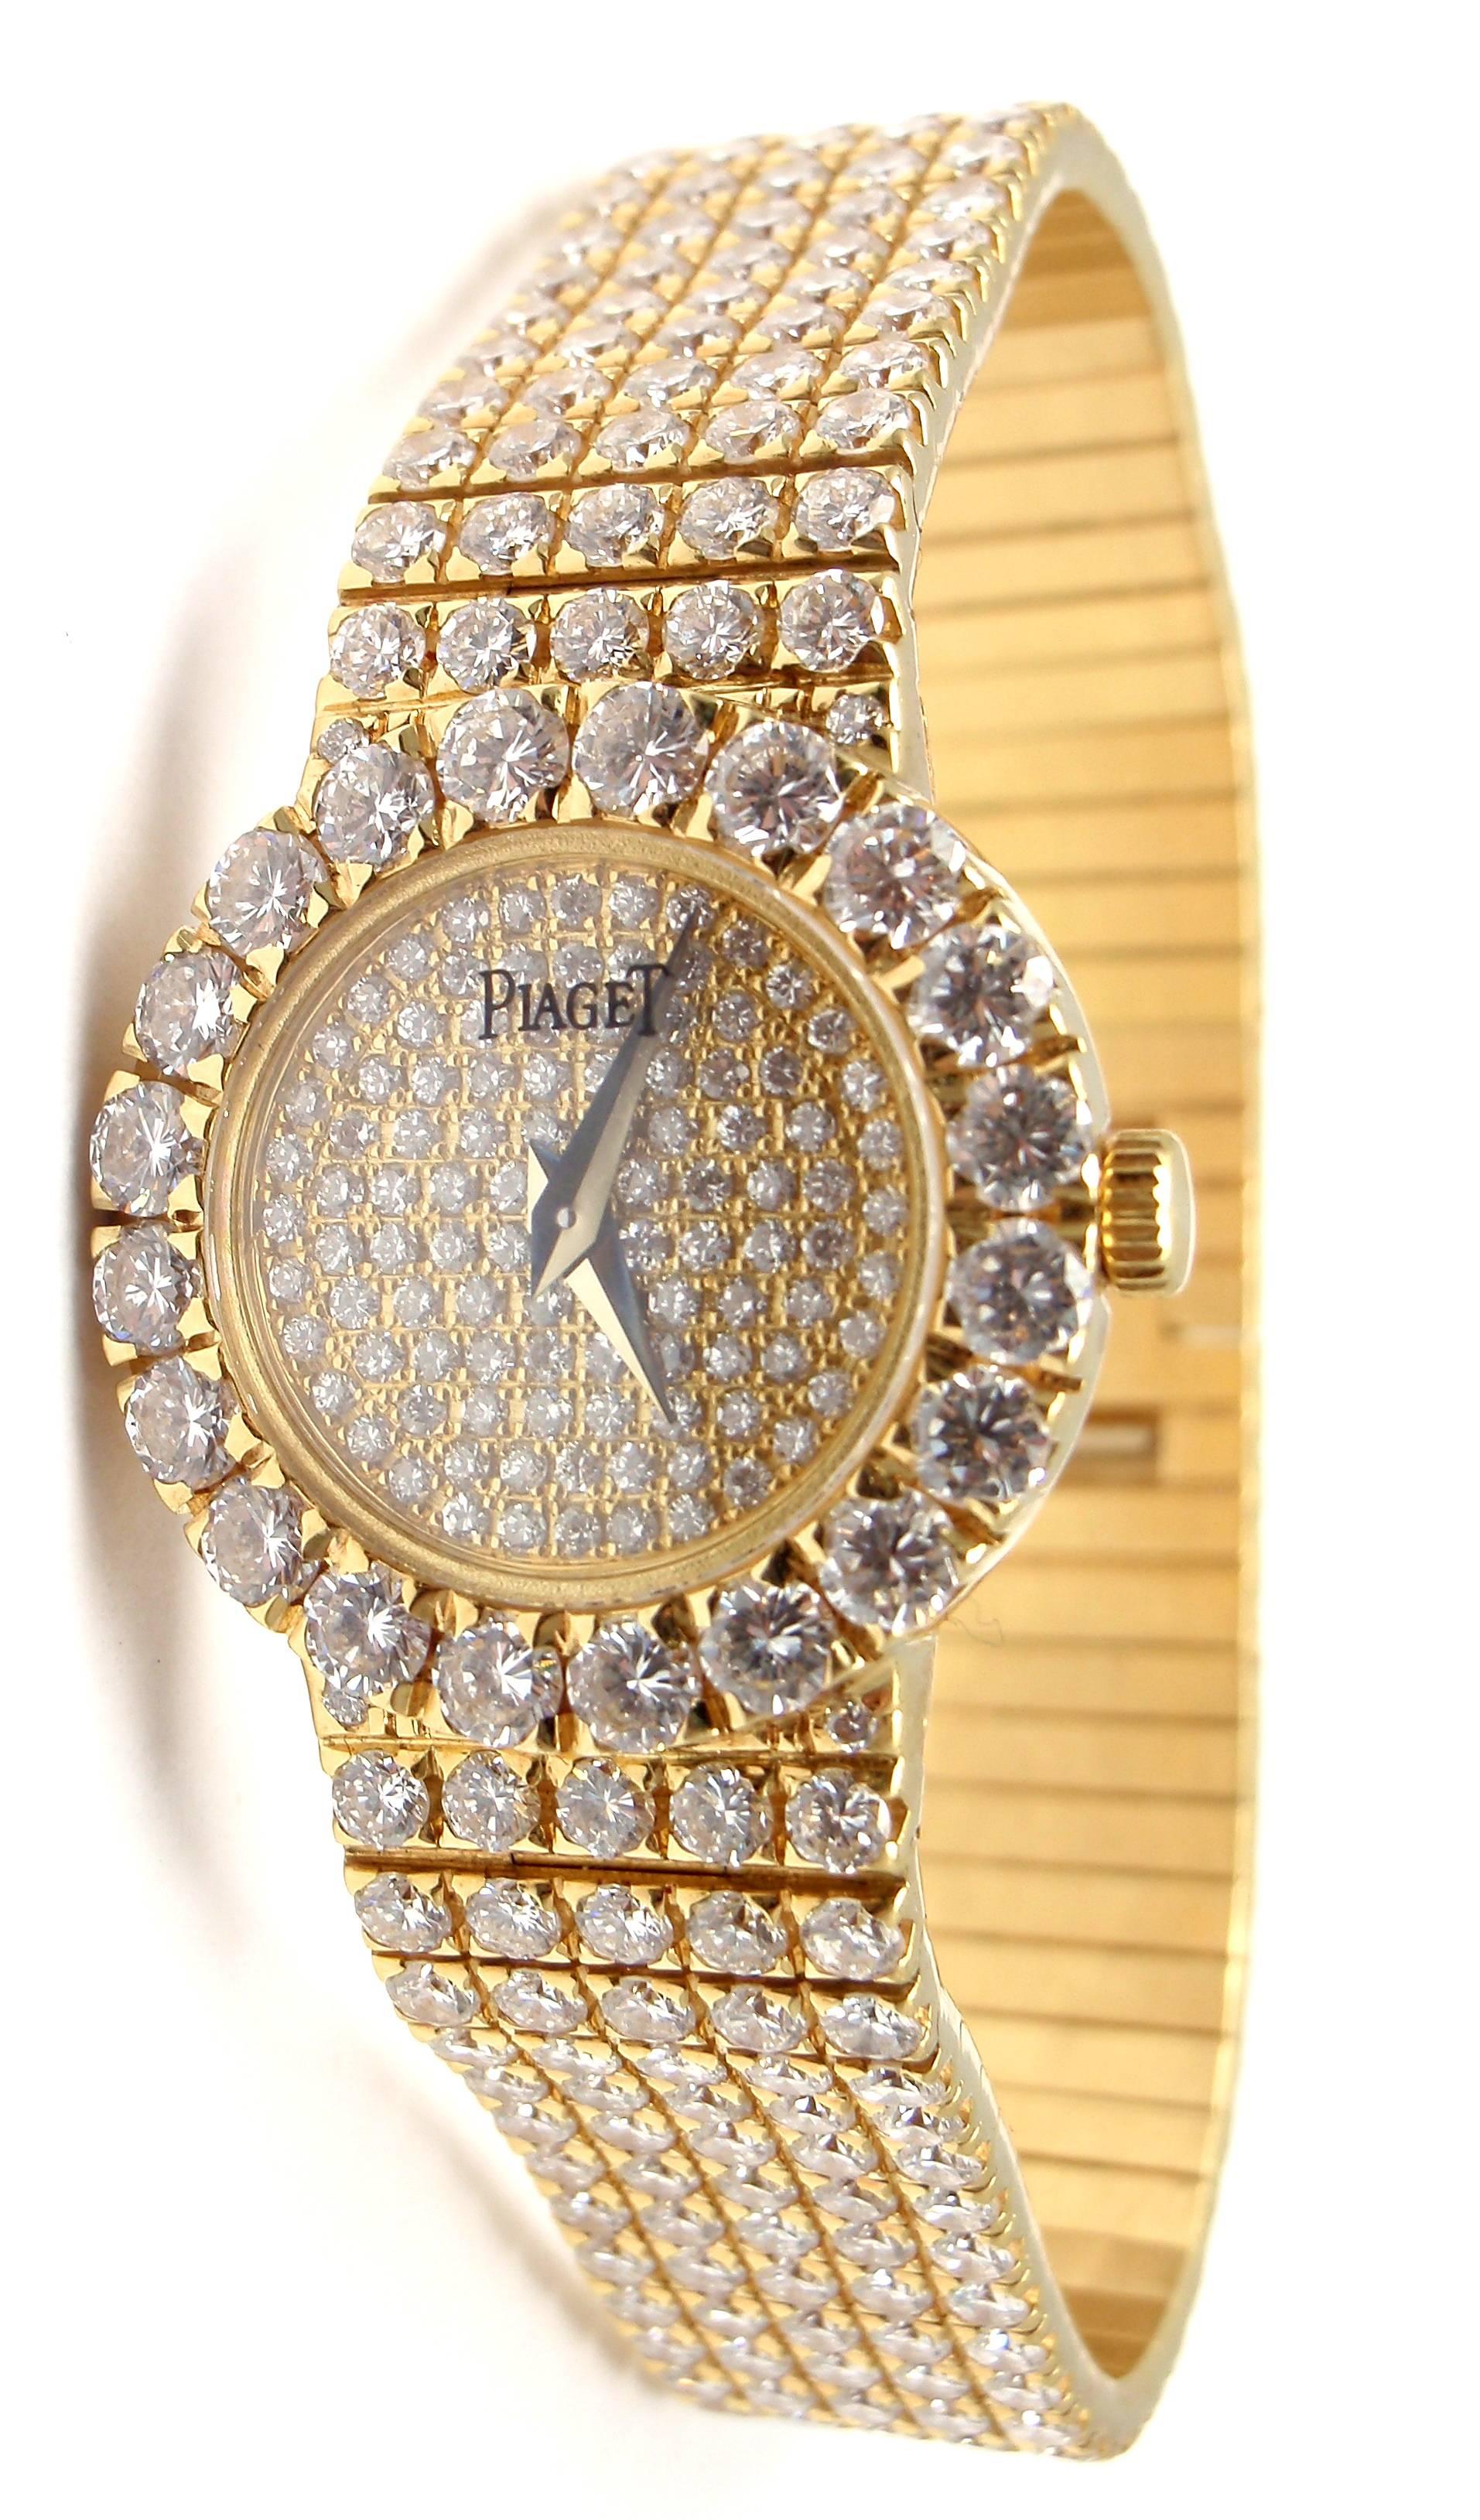 Piaget Classique Ladies 18k yellow gold and 17ct diamond wristwatch.
With 440 round brilliant cut diamonds VVS1 clarity, G color total weight approx. 17ct
This watch comes with original box and papers.

Brand:  Piaget
Reference: 